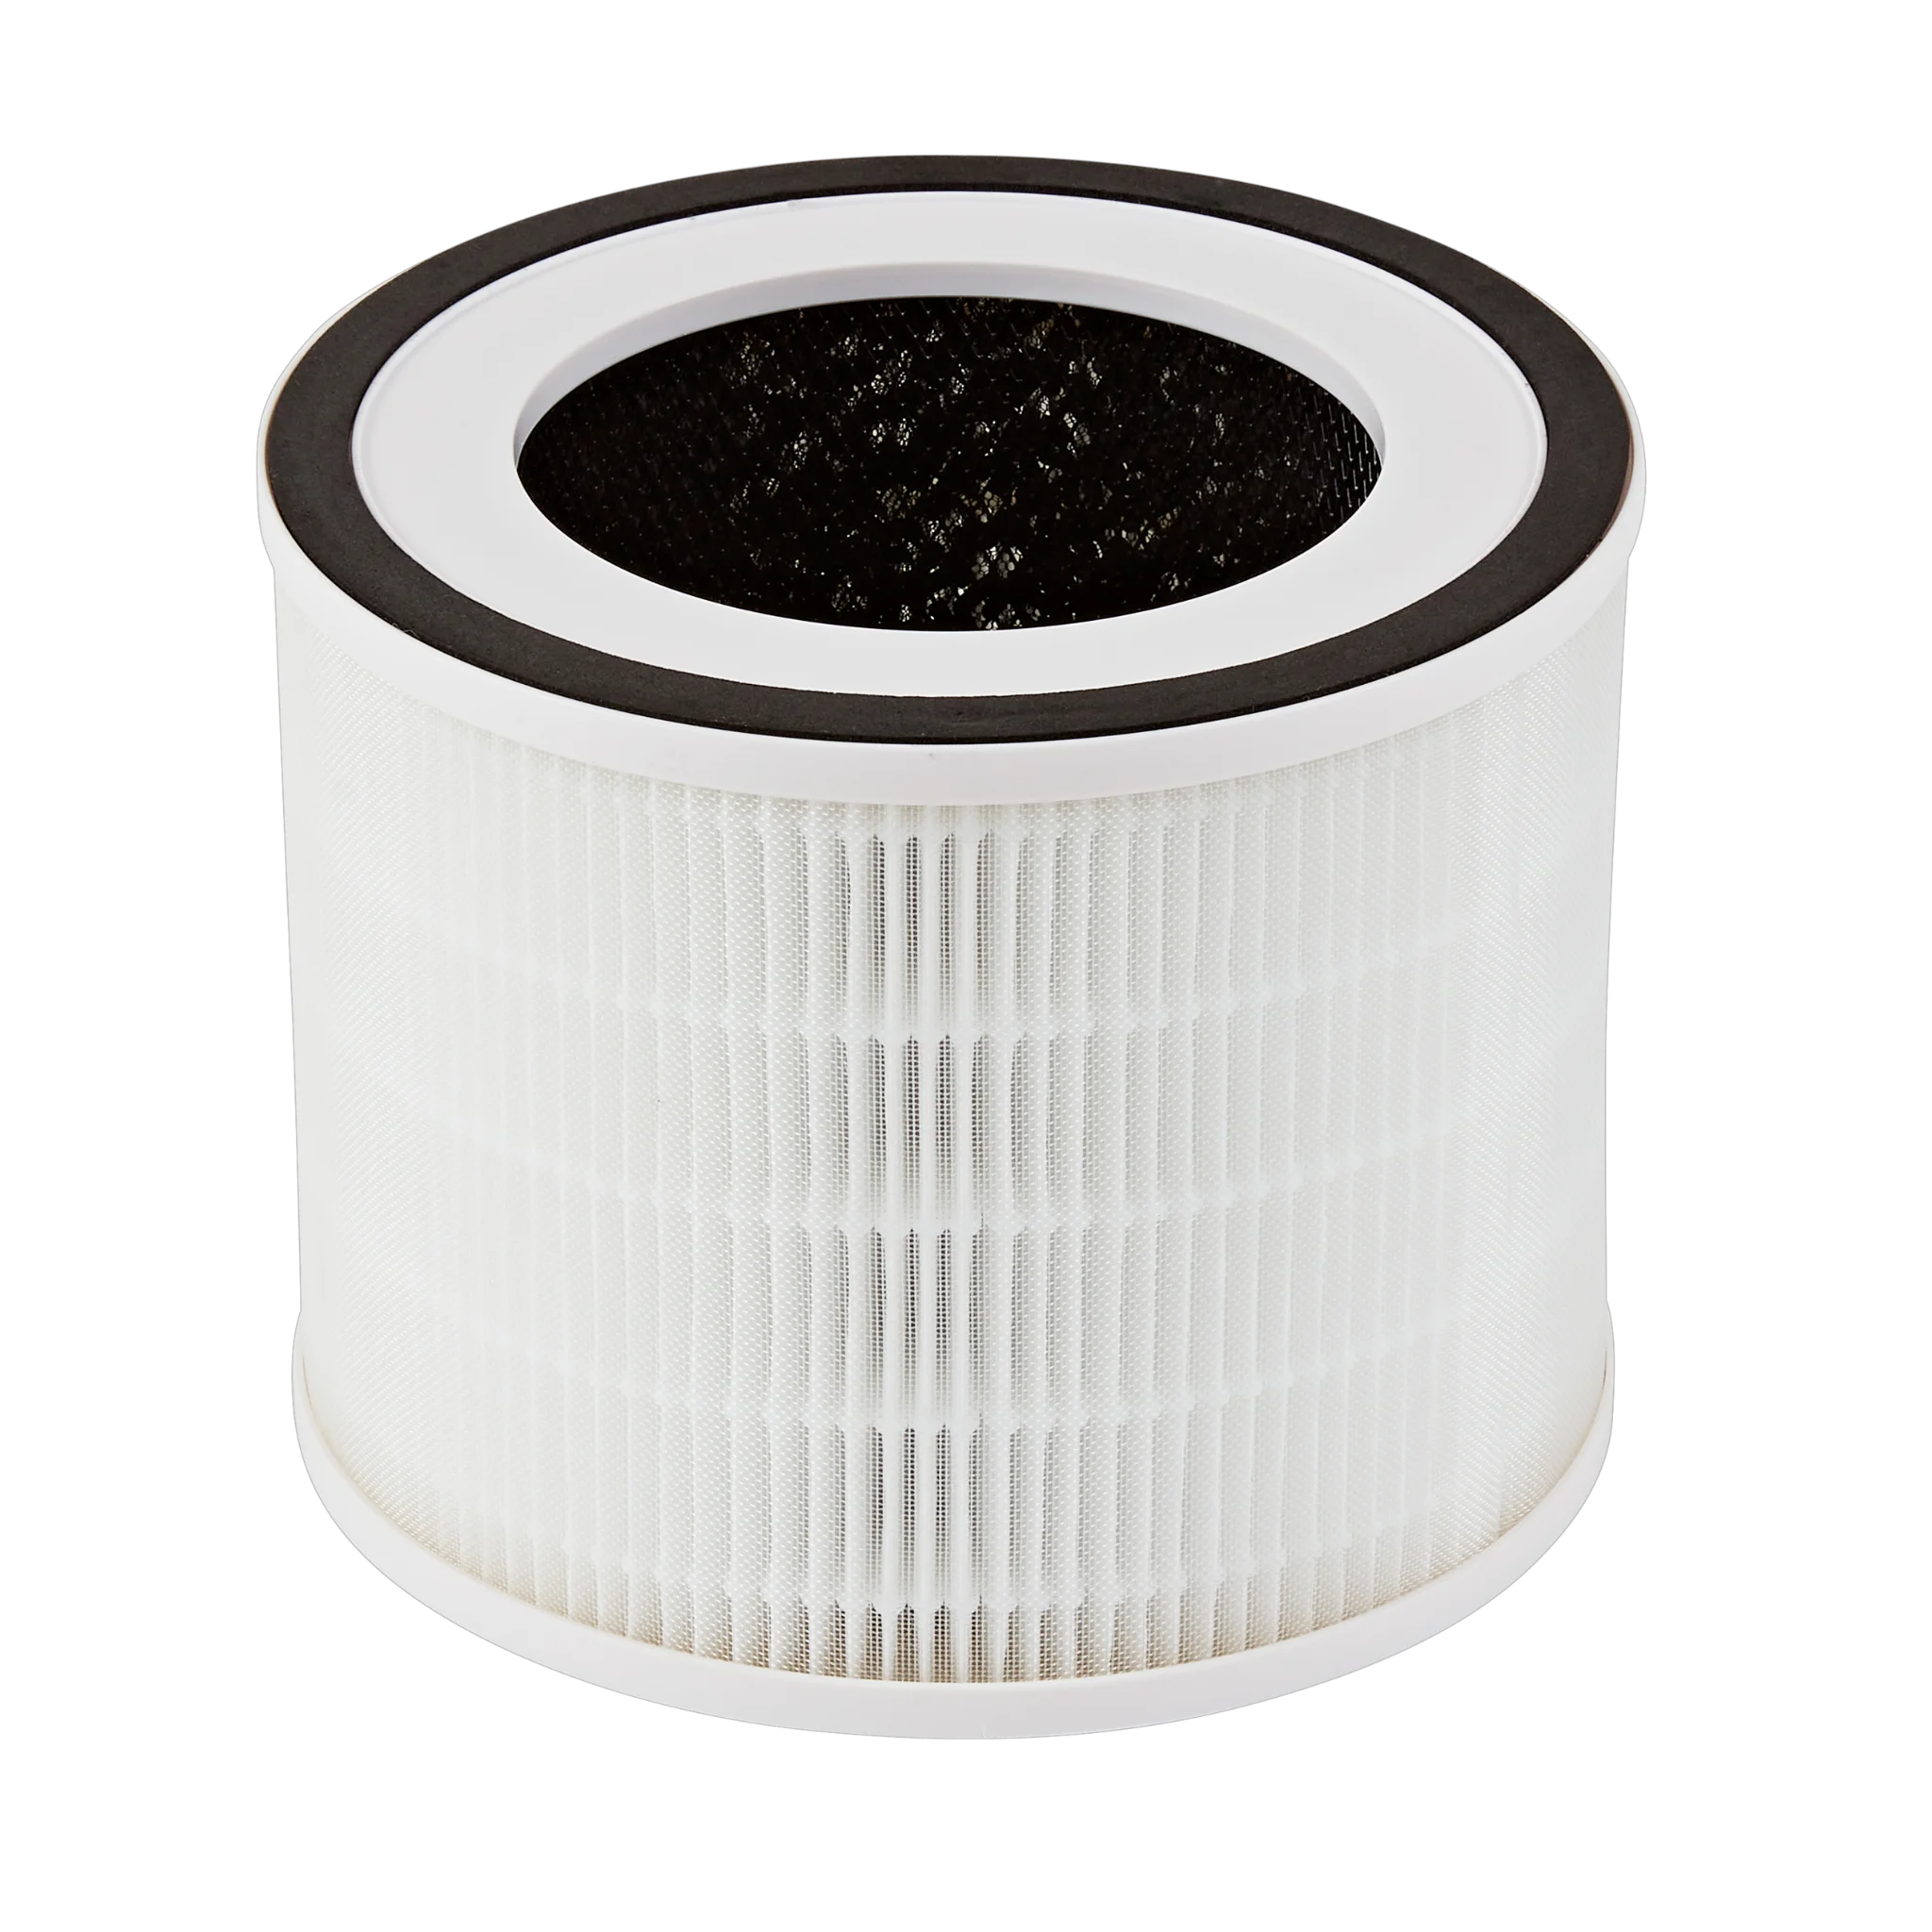 A photo of the advanced HEPA air purifier filter for the Jupiter Air Purifier on its own against a white background